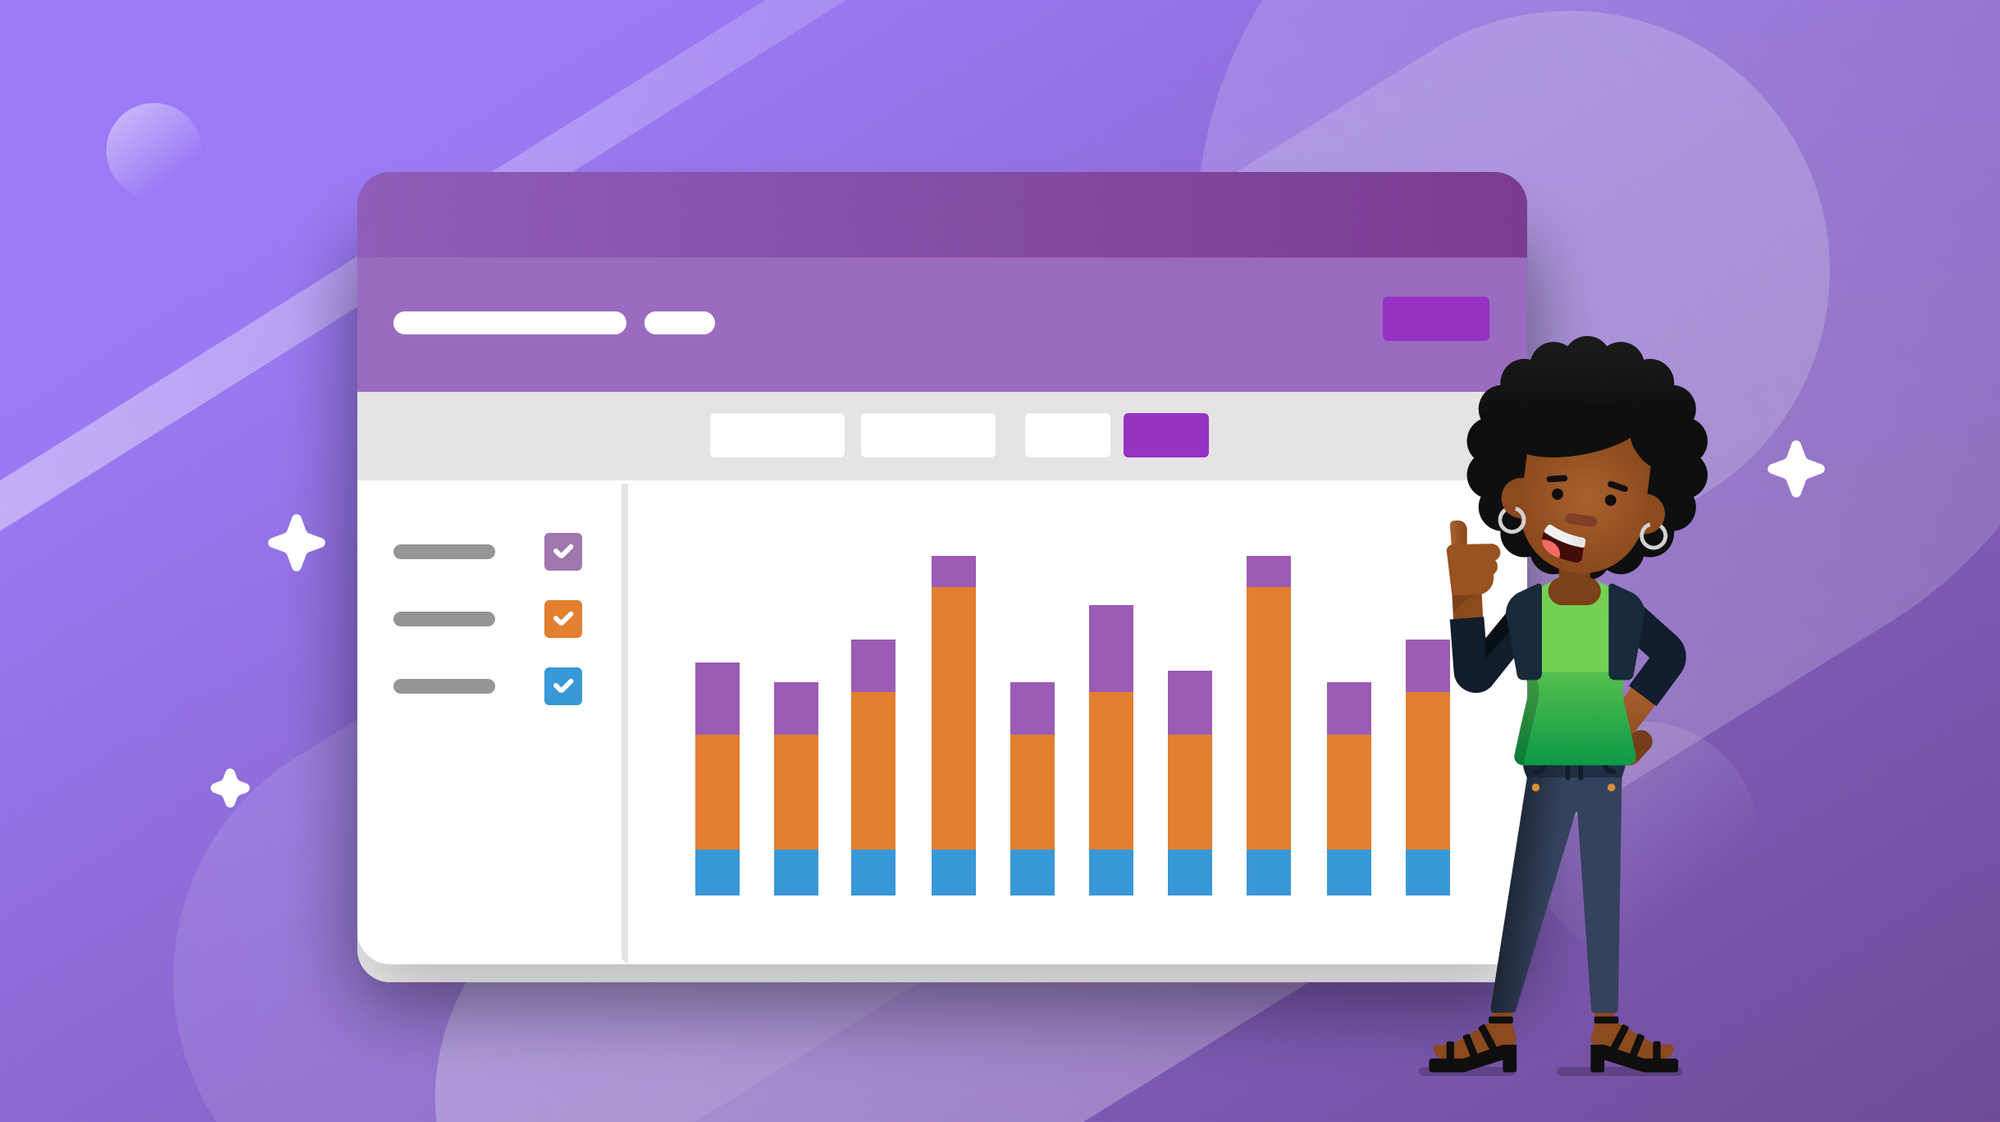 An illustrated woman giving a thumbs up standing next to a dashboard with a bar graph.